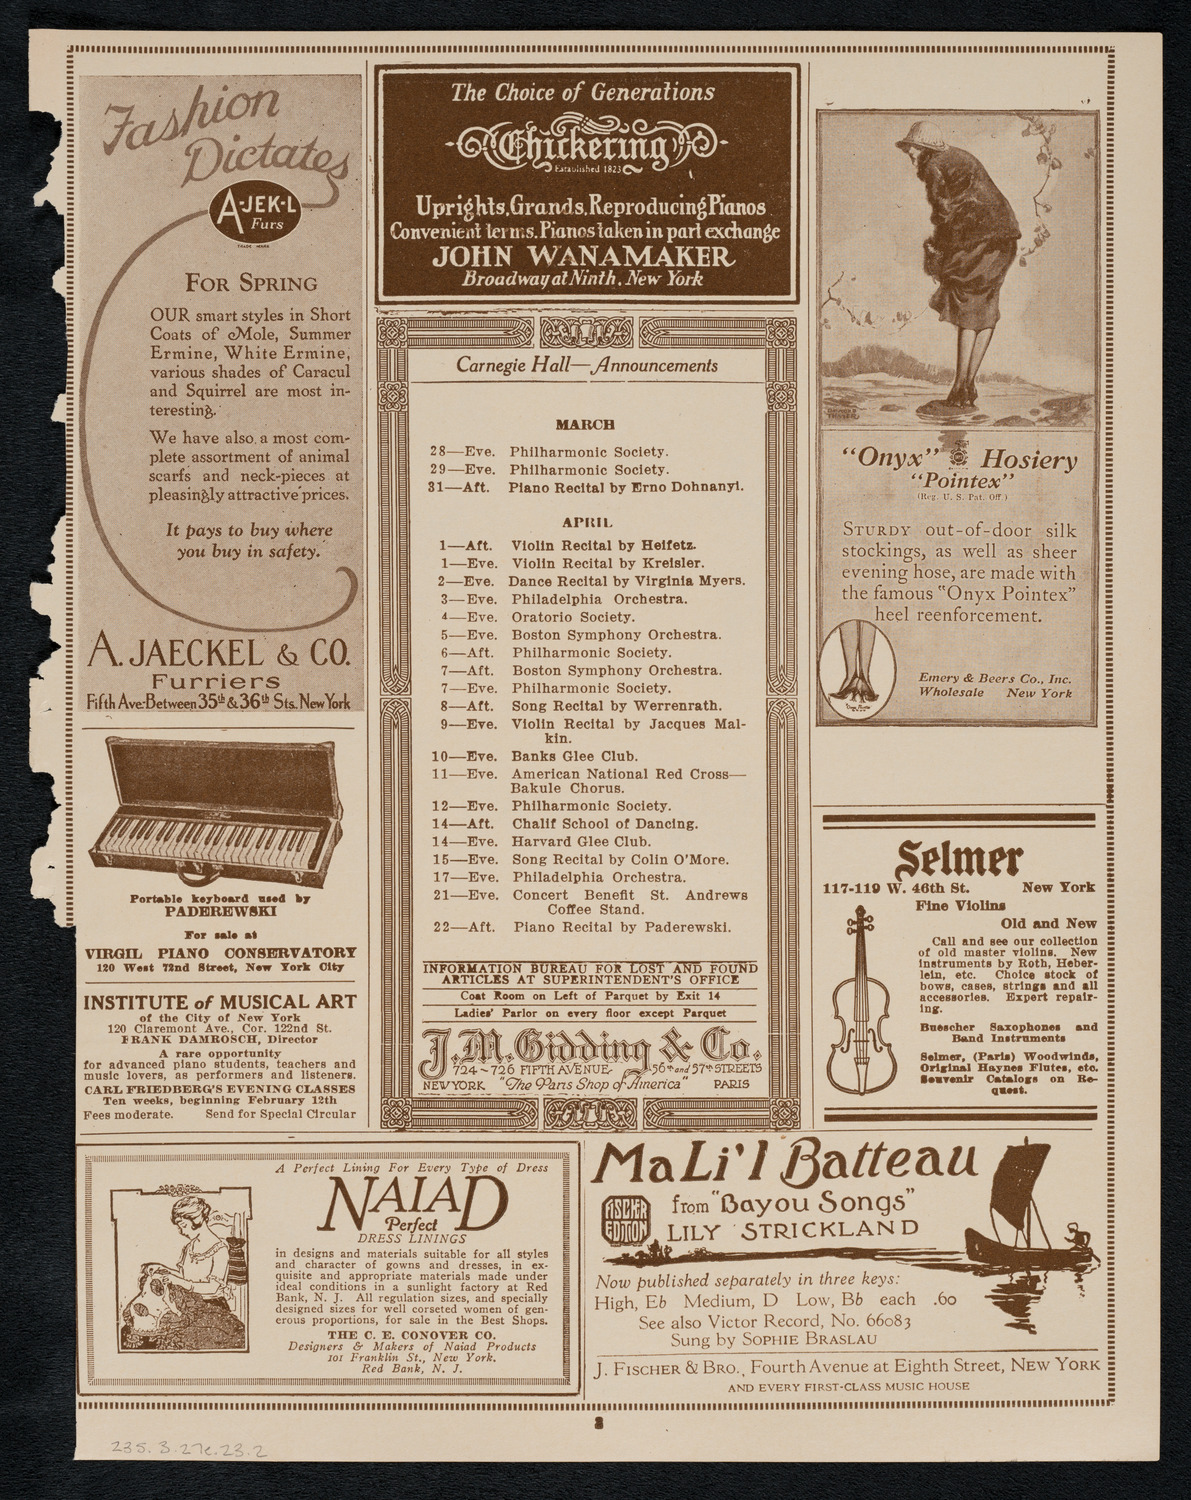 Universal Negro Improvement Association Meeting and Concert, March 27, 1923, program page 3